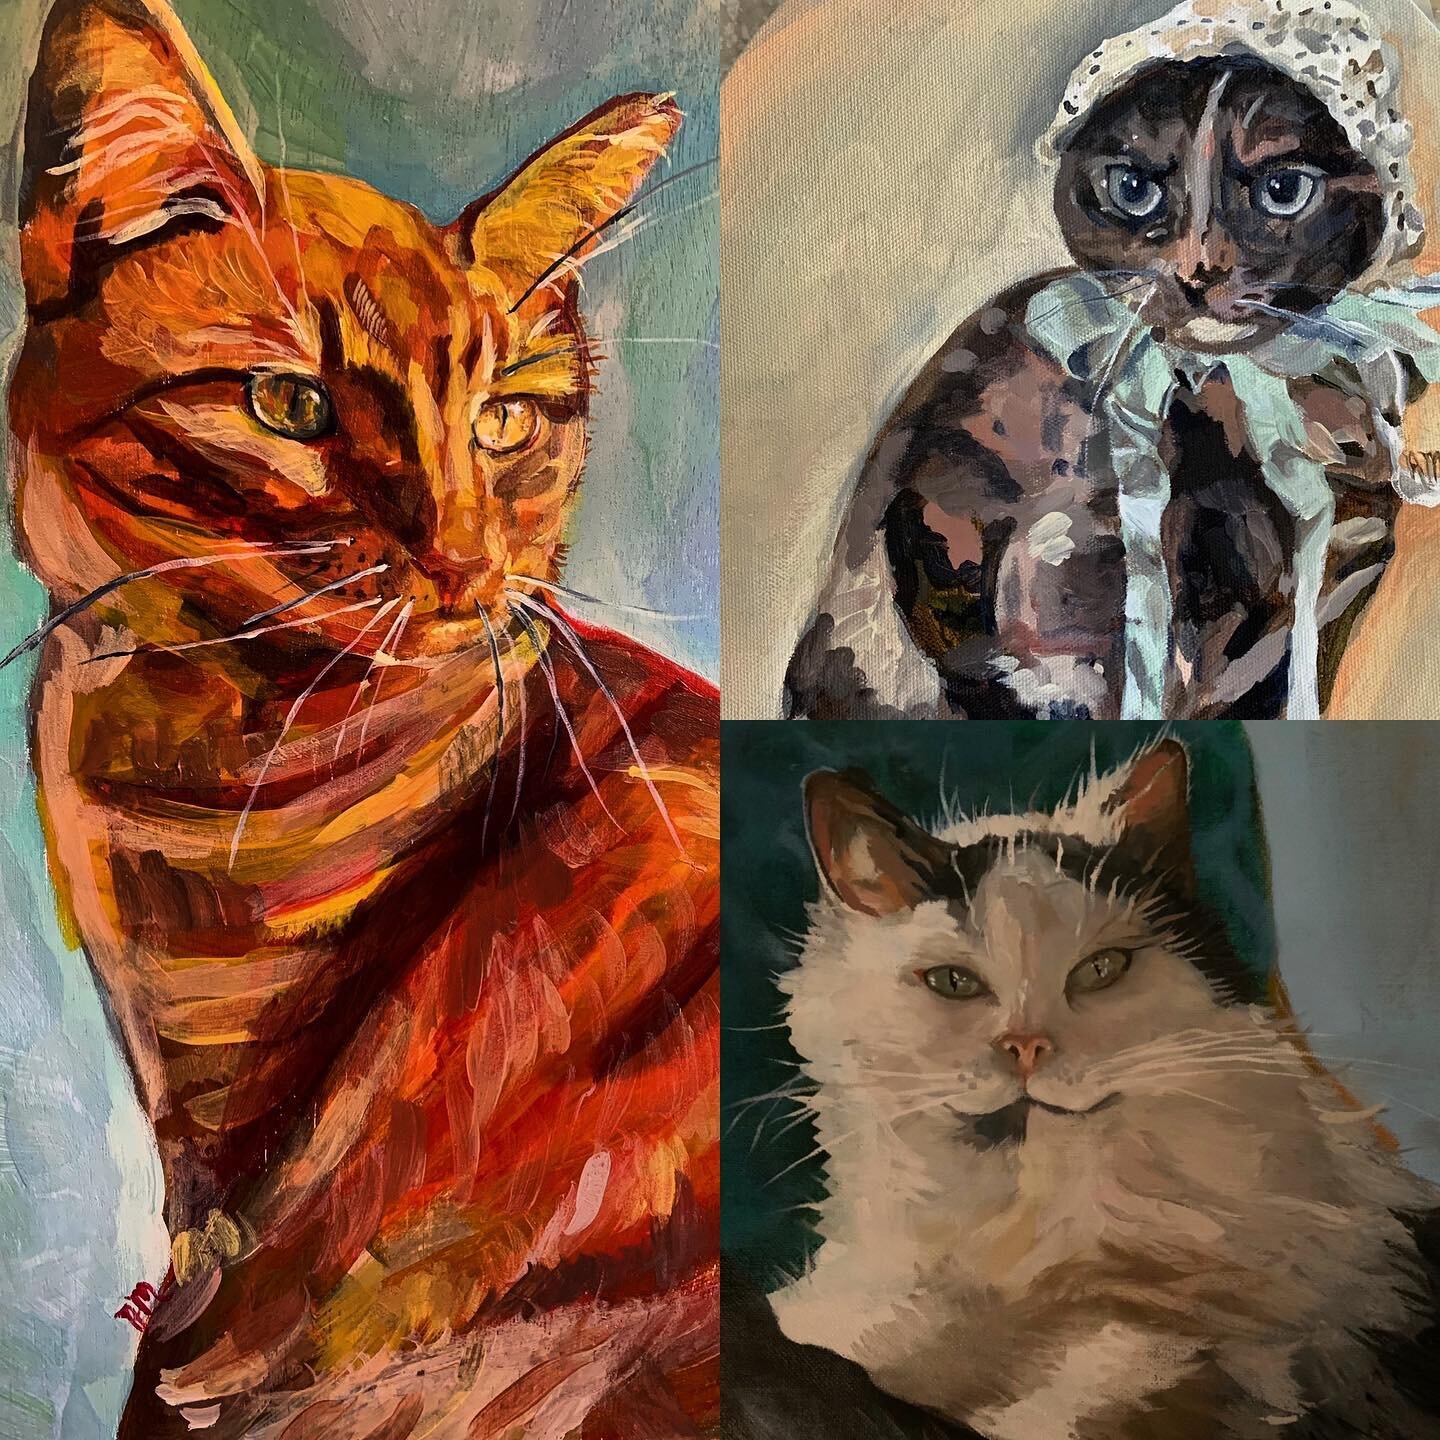 For a pet portrait price list private message me...
#petportrait #petportriats #petportaitartist #petportraitsofinstagram #catart #catpaintings #giftideas #gifts #birthdaygift #perfectpresent